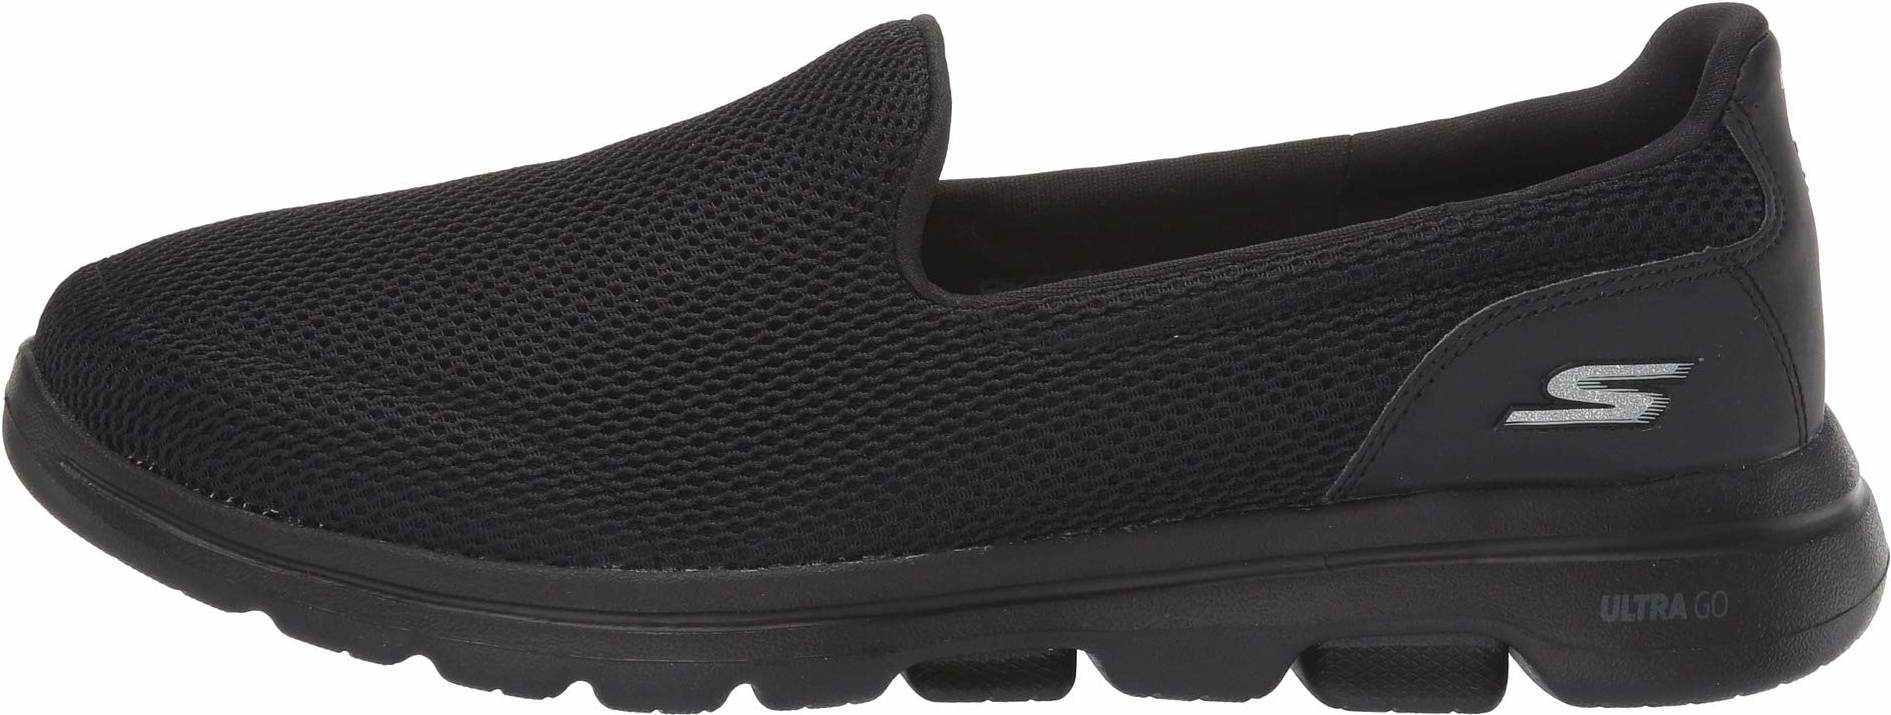 Only $48 + Review of Skechers GOwalk 5 